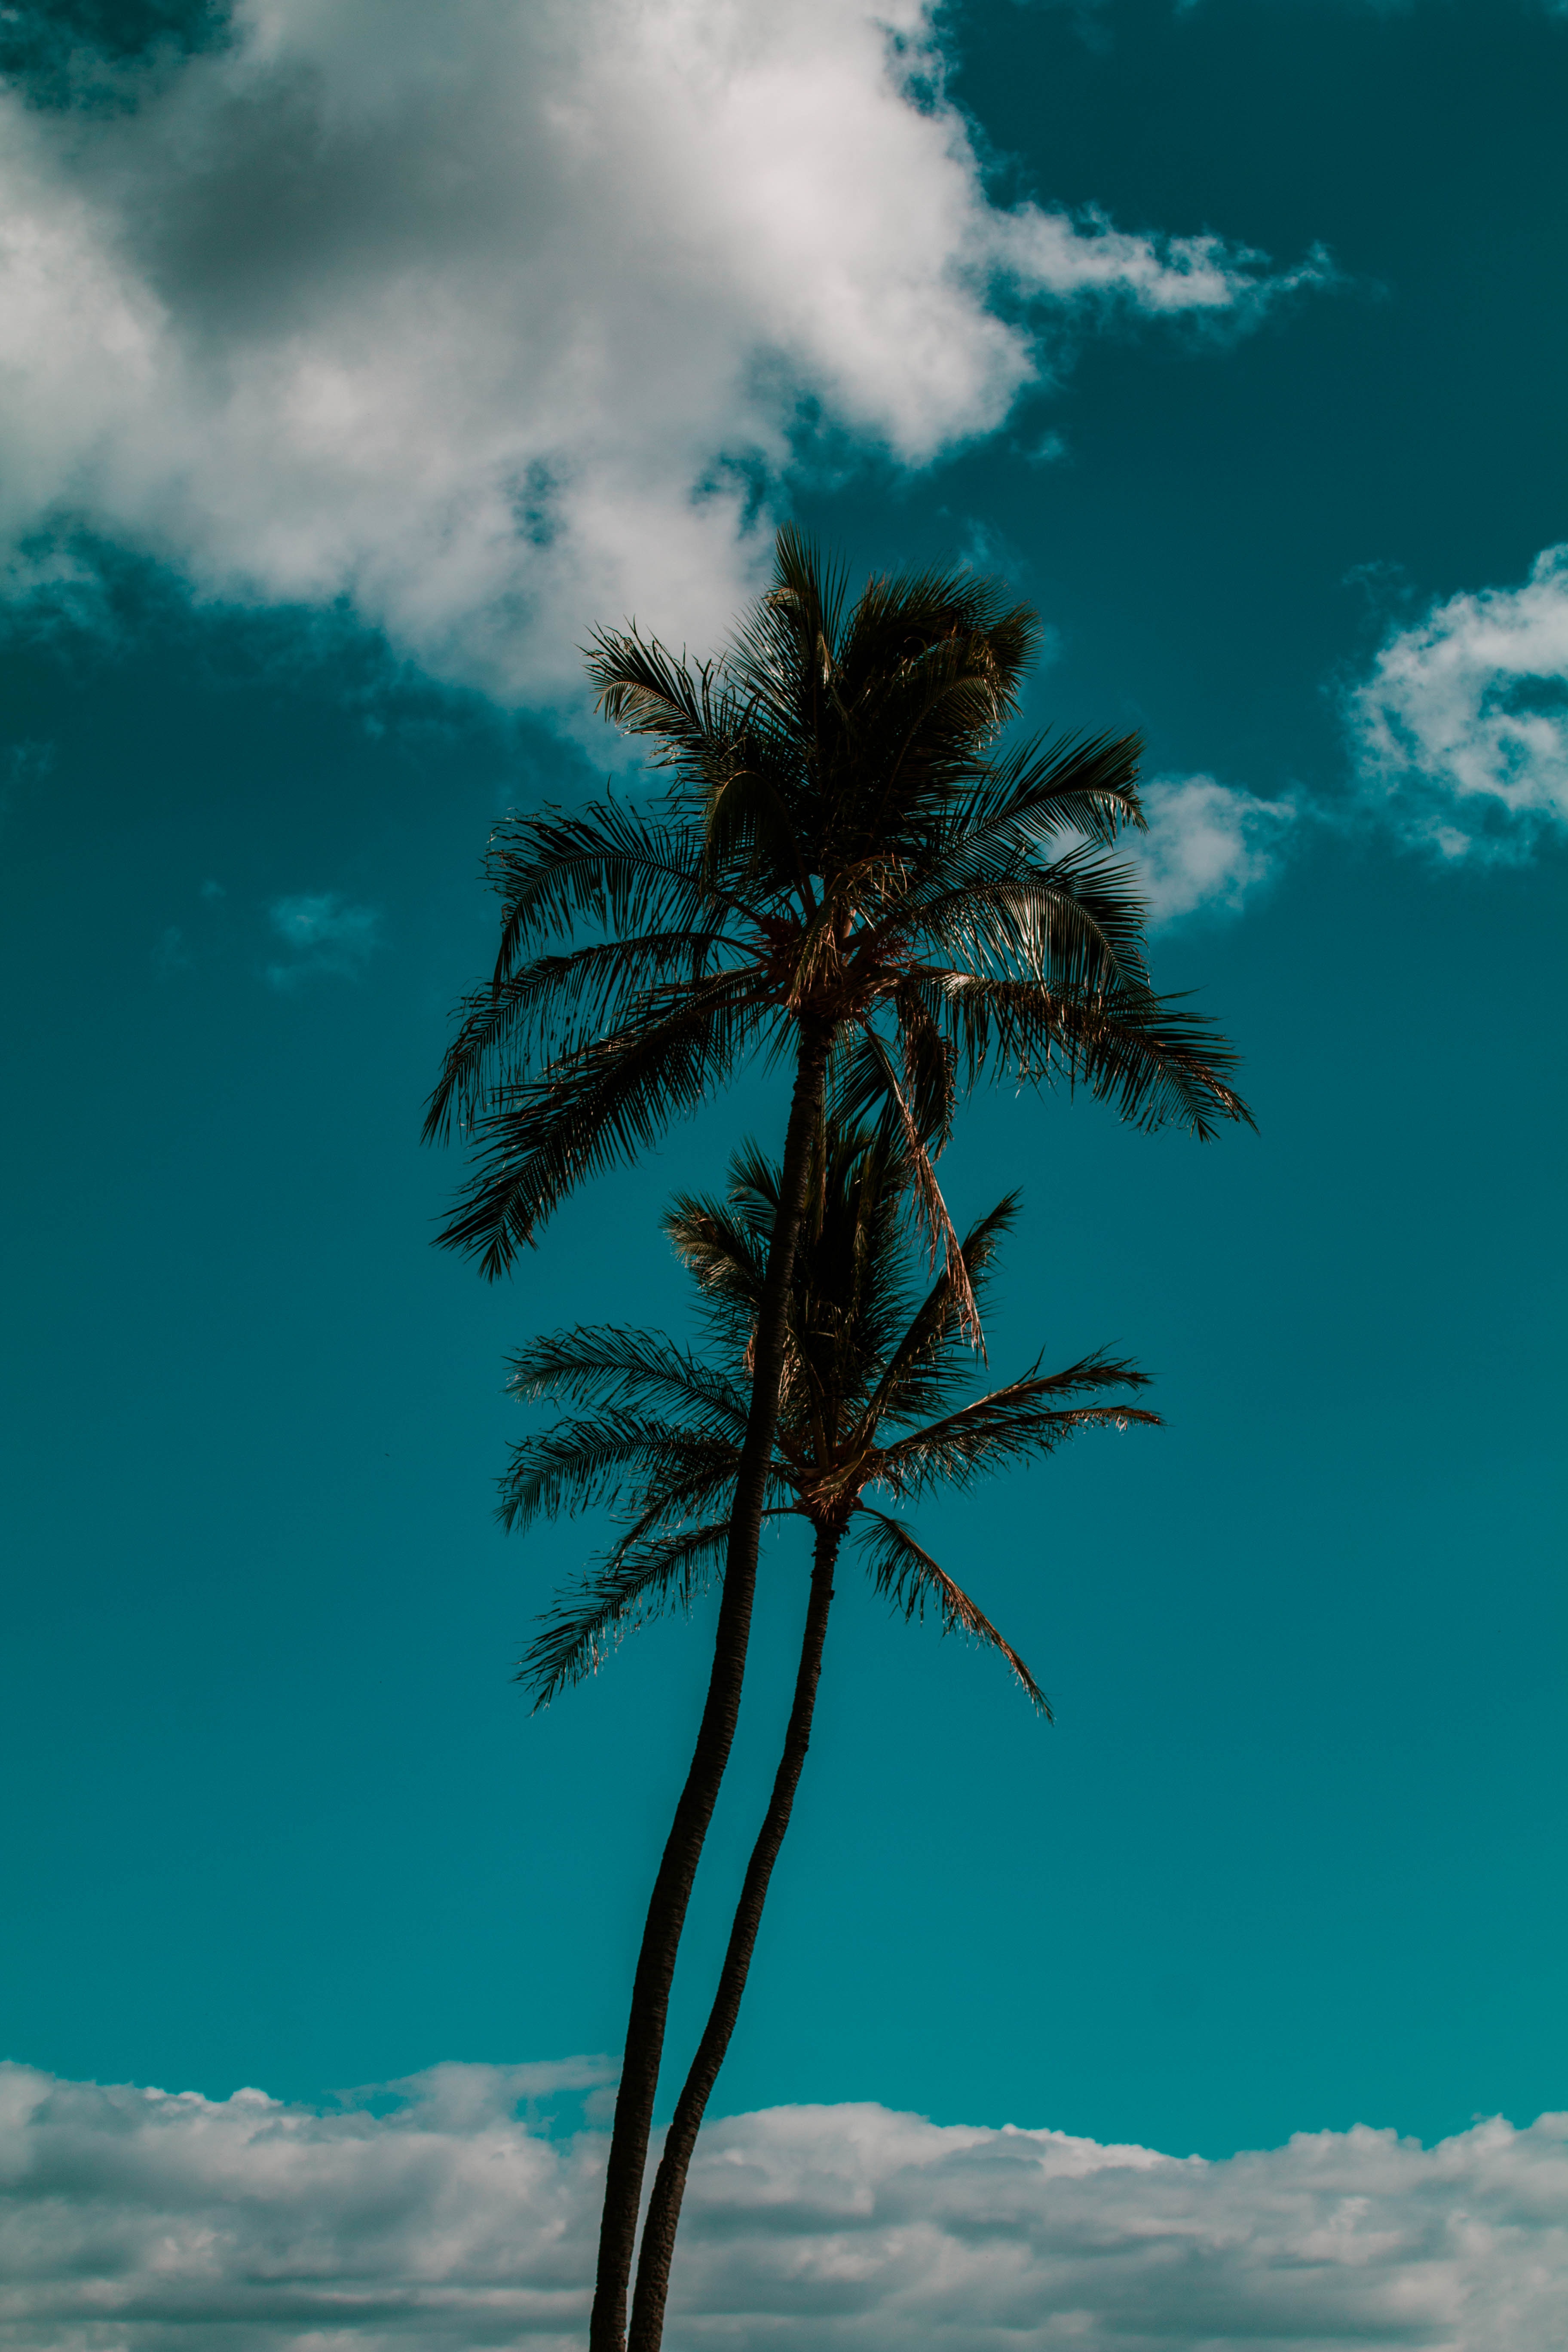 trees, nature, sky, clouds, palm, tropics High Definition image